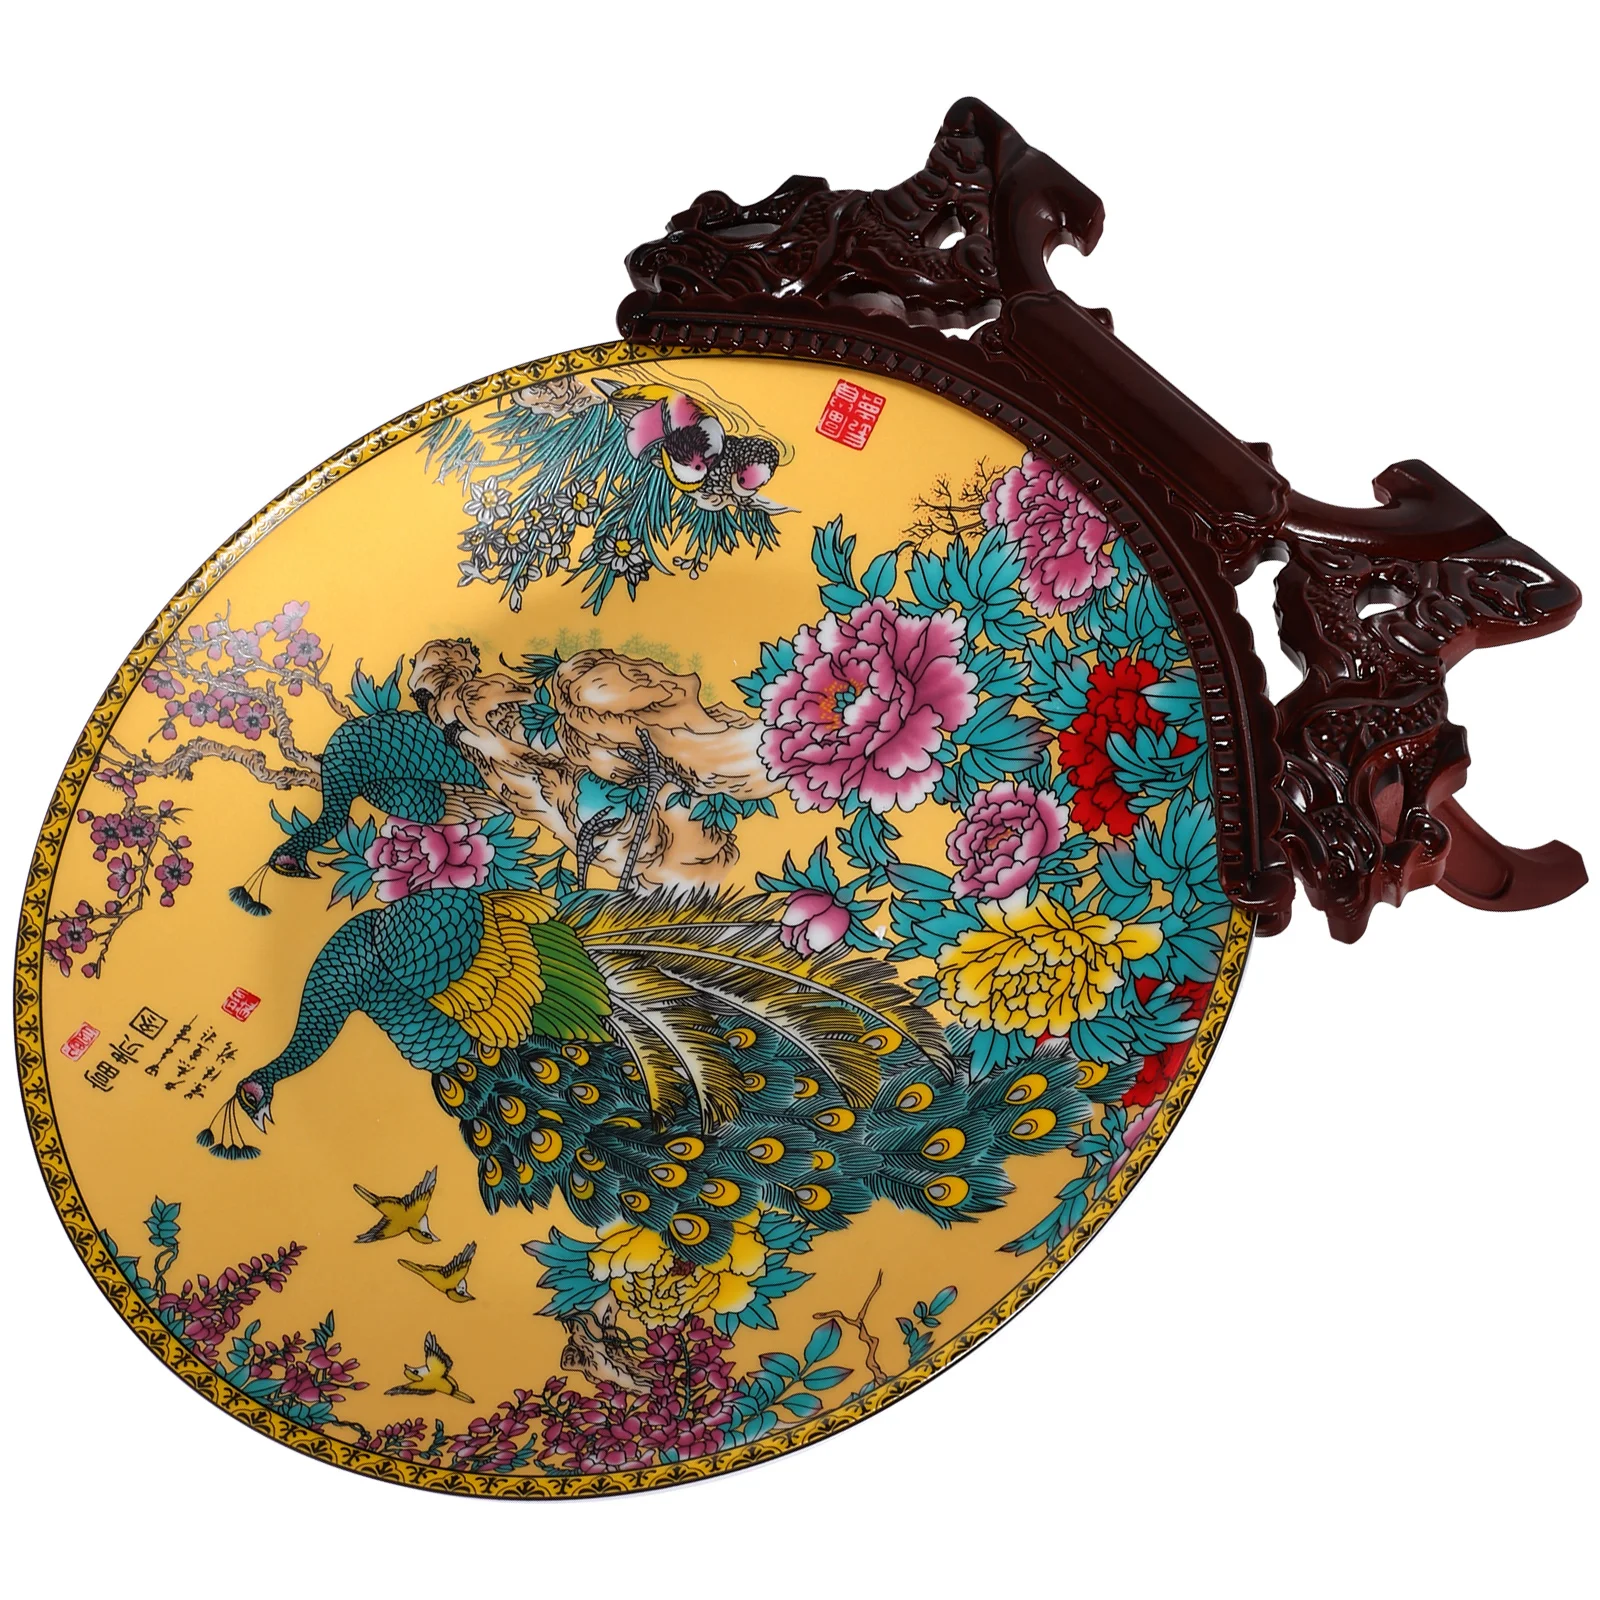 

Ceramic Plate Round Tray Artwork Ornament Decor Decorative Plates For Home Abs Food Dish Office Dinner